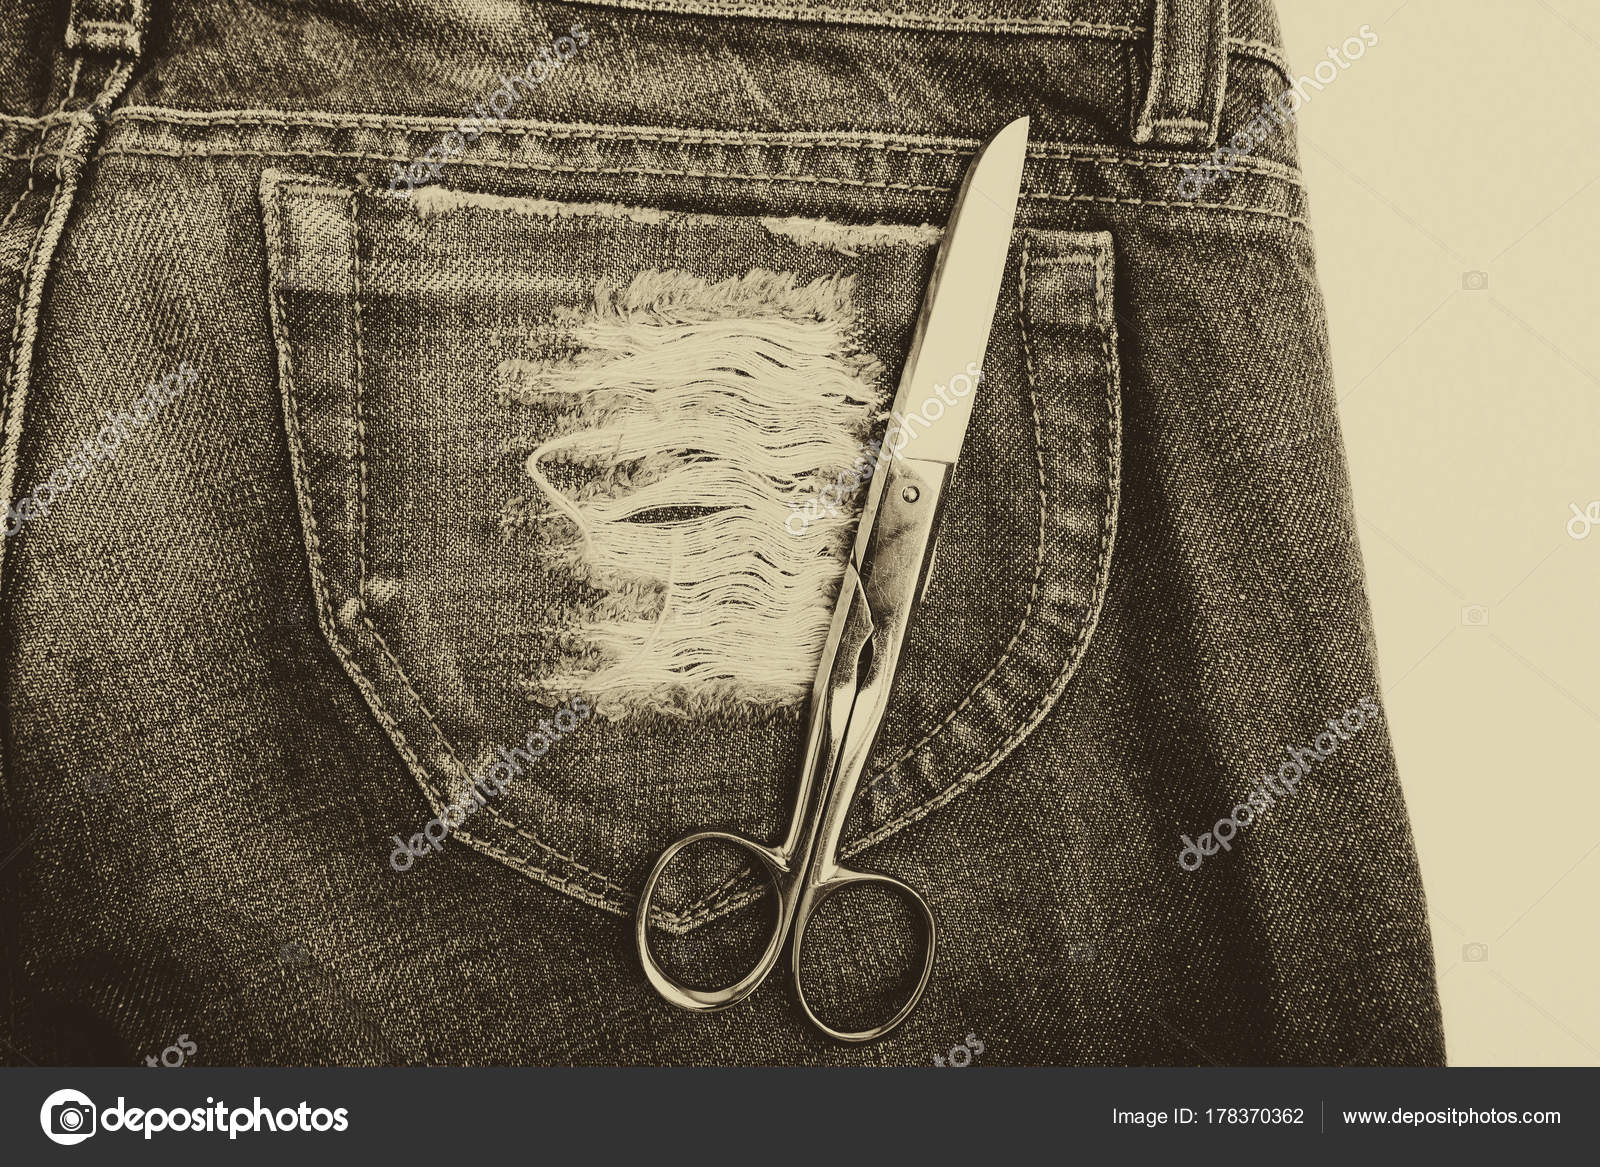 Image of Torn jeans Pant Pocket image for background-LZ198643-Picxy